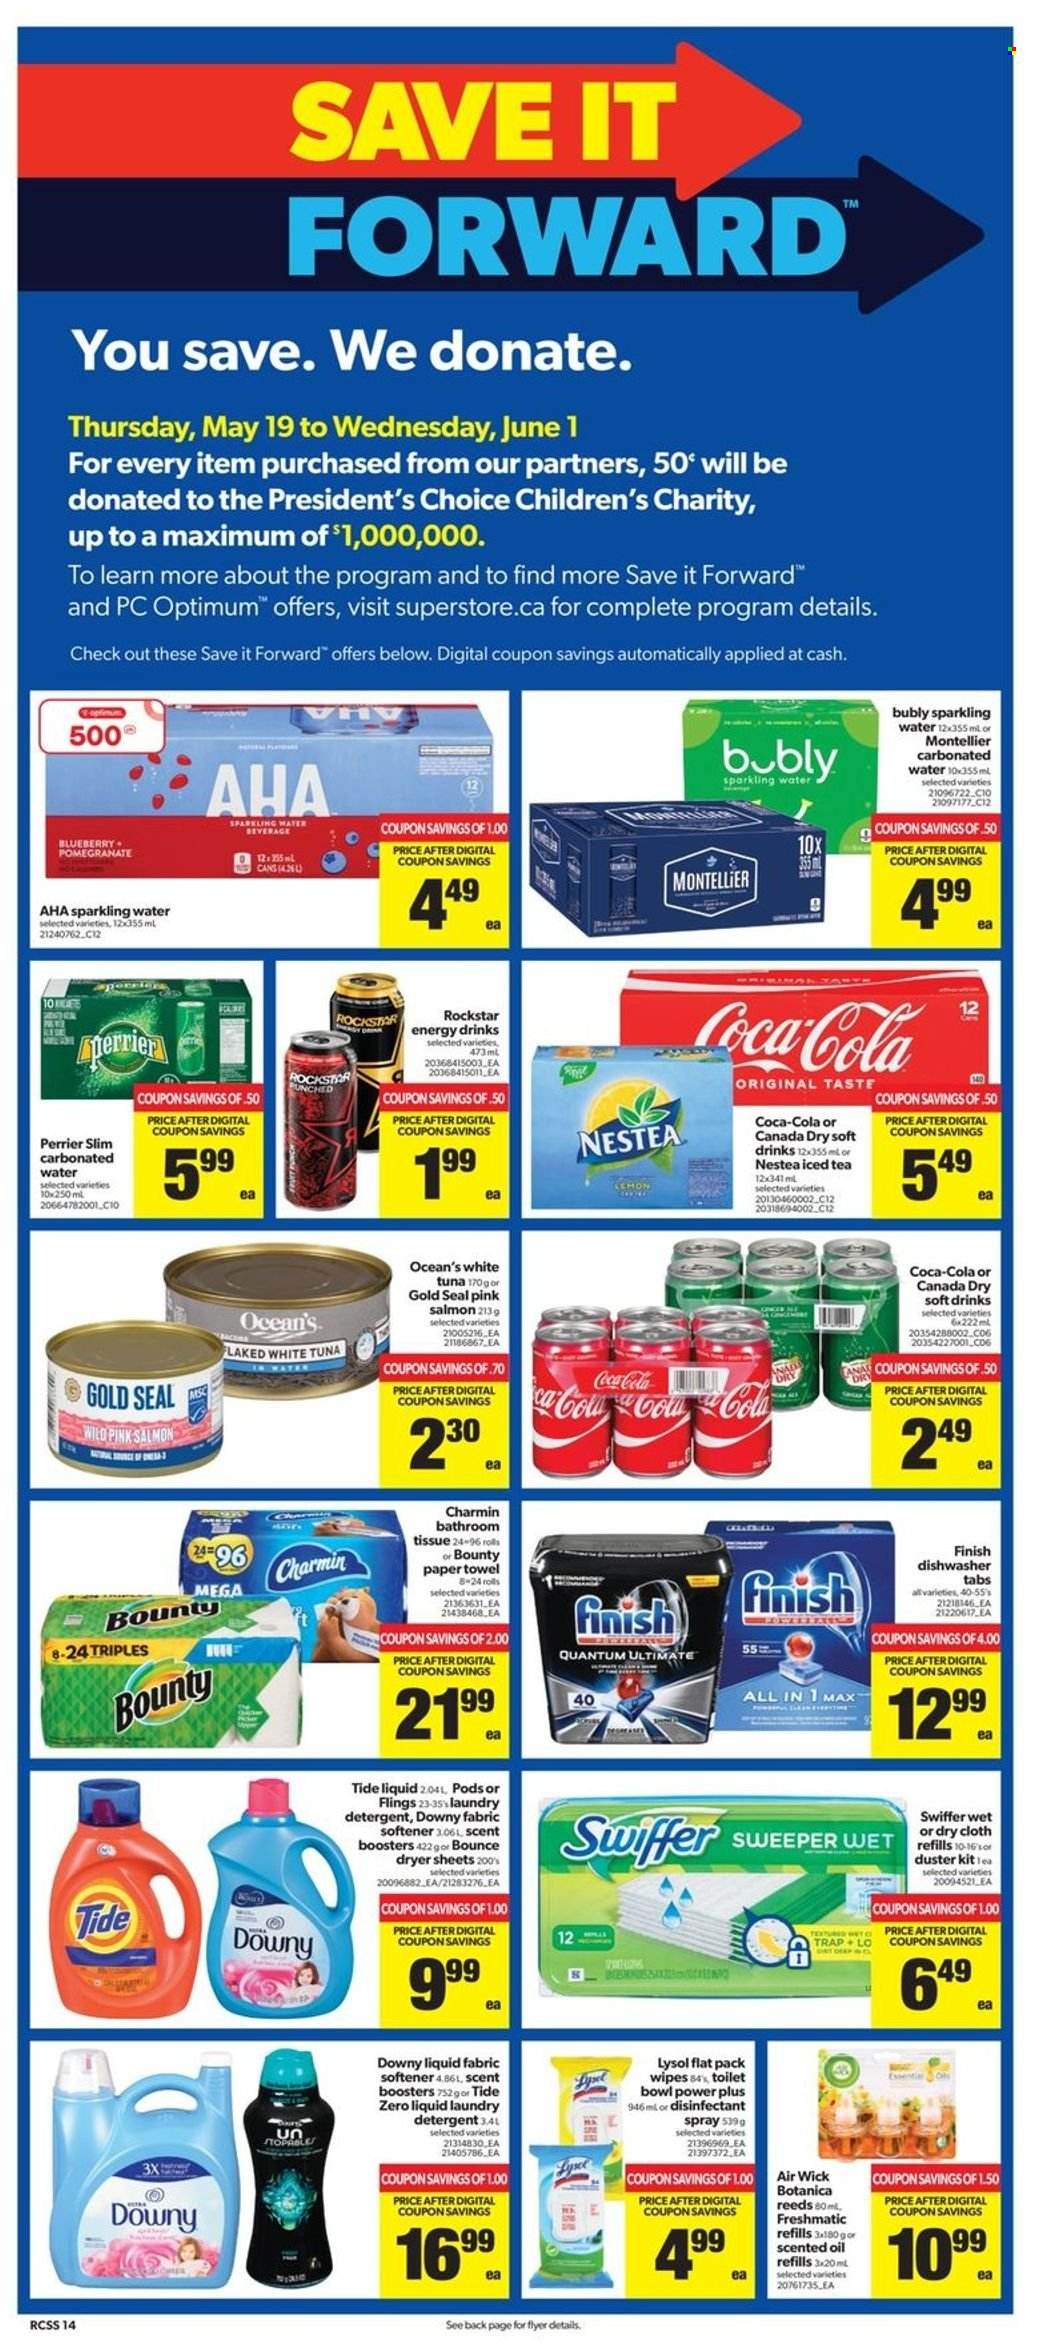 thumbnail - Real Canadian Superstore Flyer - May 19, 2022 - May 25, 2022 - Sales products - pomegranate, salmon, tuna, Président, Bounty, oil, Canada Dry, Coca-Cola, energy drink, ice tea, soft drink, Perrier, Rockstar, sparkling water, wipes, bath tissue, paper towels, Charmin, Lysol, Swiffer, Tide, fabric softener, laundry detergent, Bounce, dryer sheets, scent booster, Downy Laundry, antibacterial spray, duster, Air Wick, scented oil, Optimum, detergent, desinfection. Page 14.